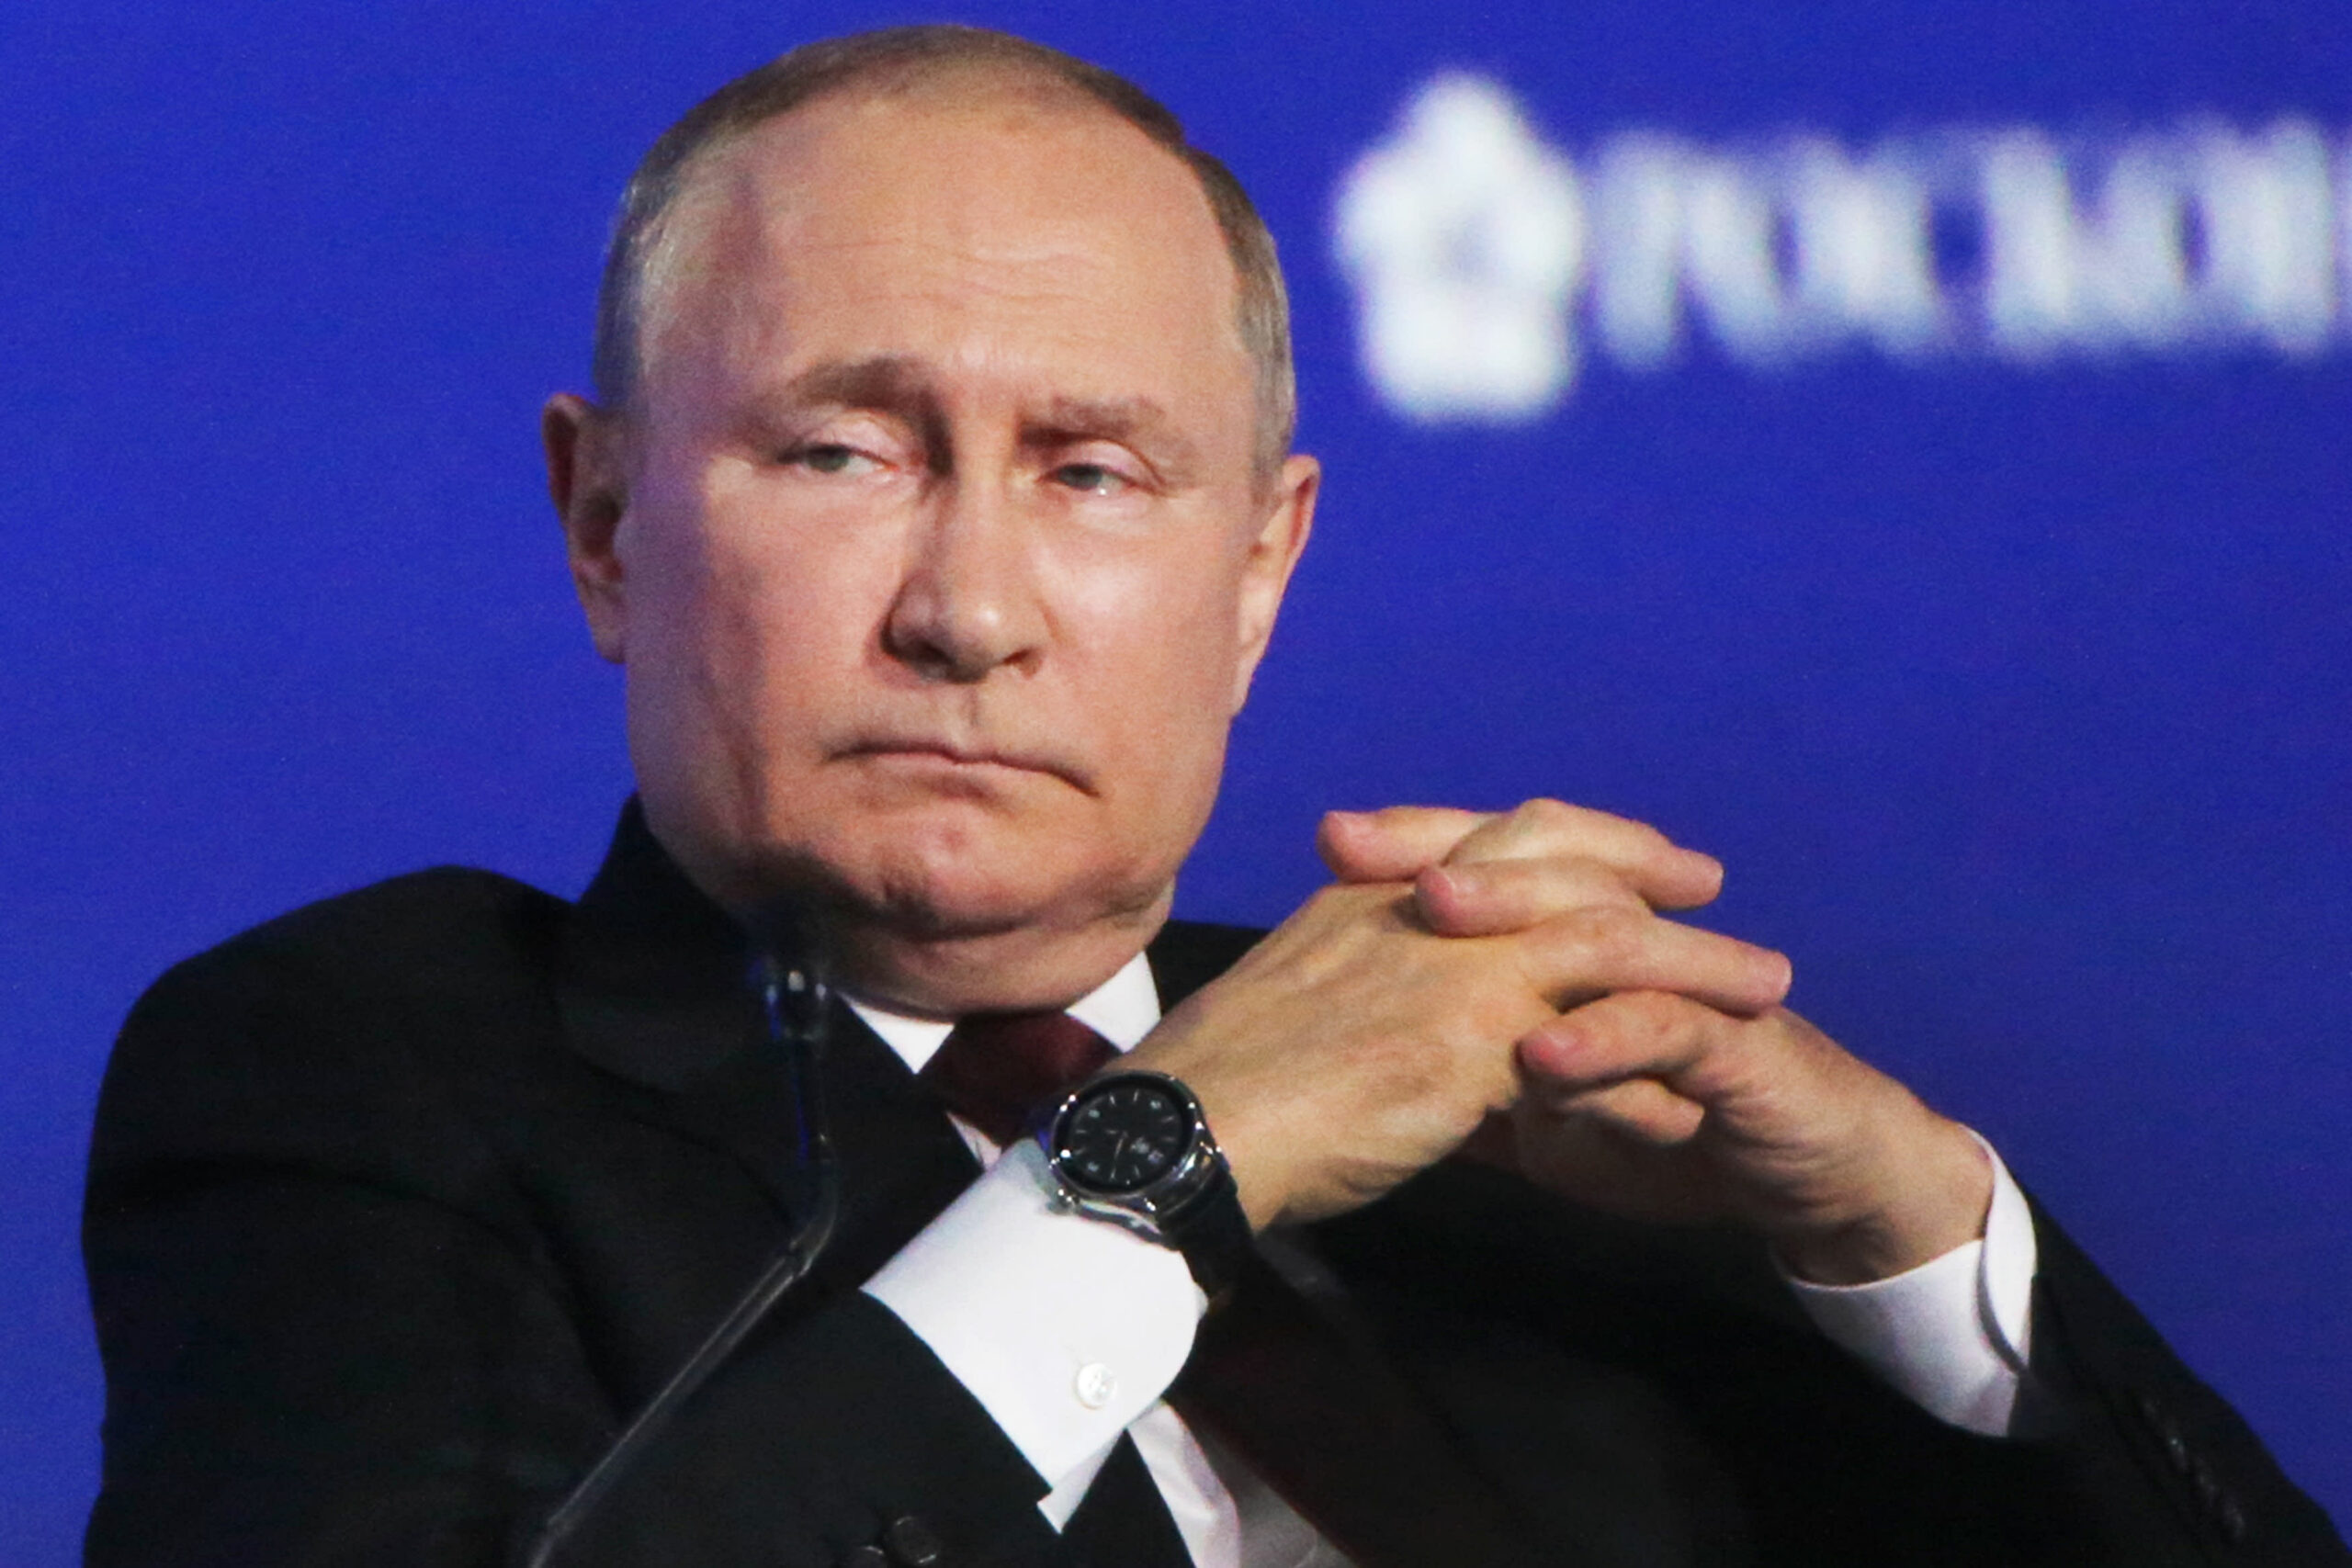 Putin lashes out at the US, claiming it wants to drag out the war in Ukraine and provoke China